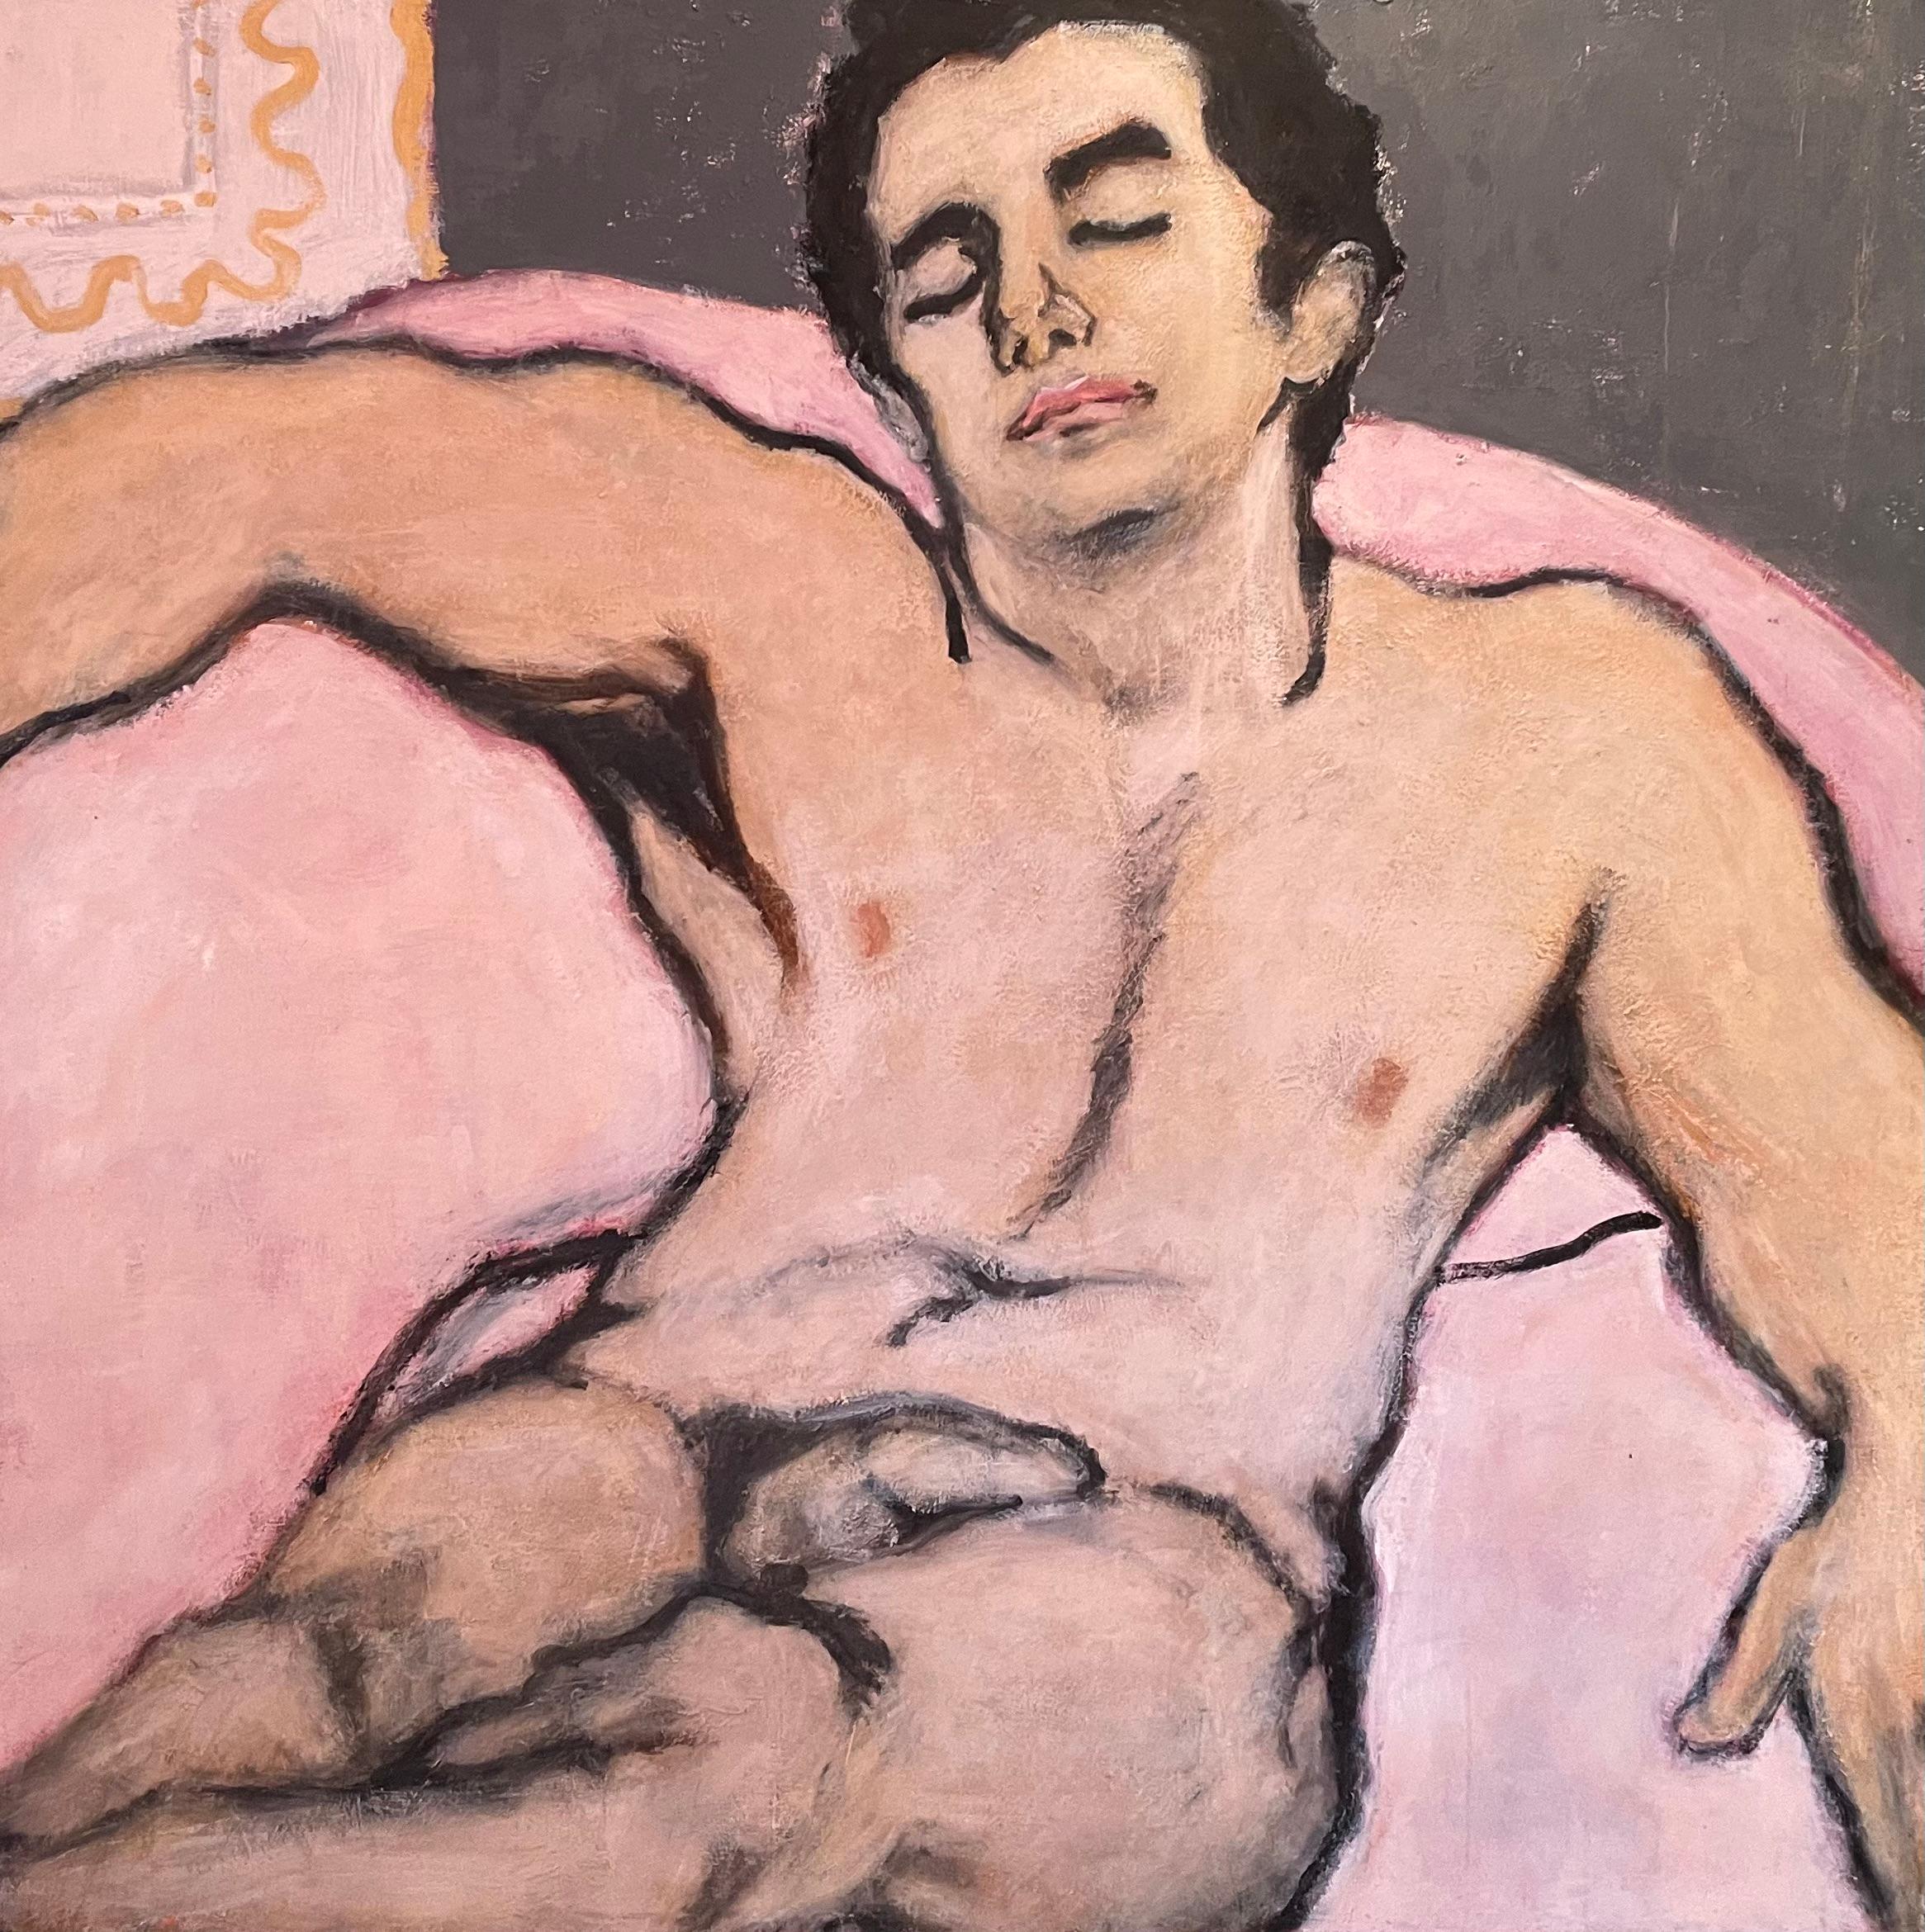 Betsy Podlach Figurative Painting - 'Young Man in Repose' by Podlach - Large Figurative Nude Young Man Painting 